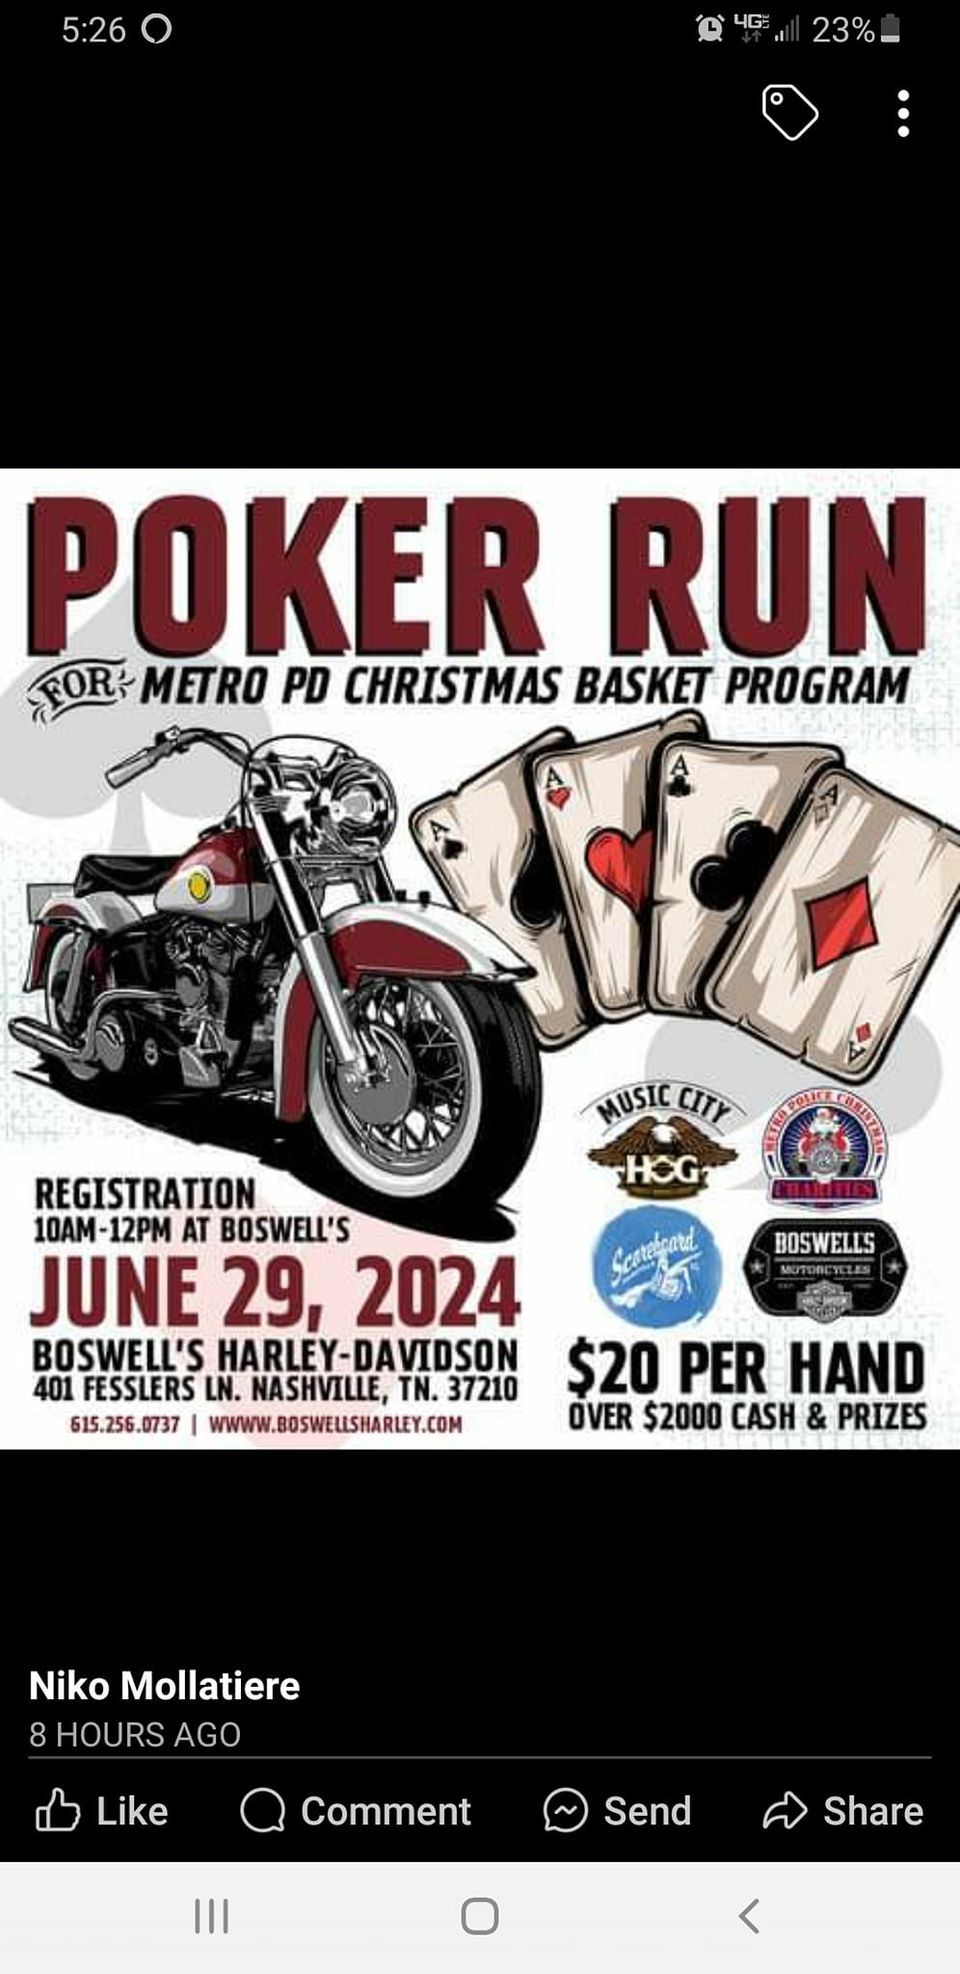 Poker Run (Support The MP Christmas Basket)